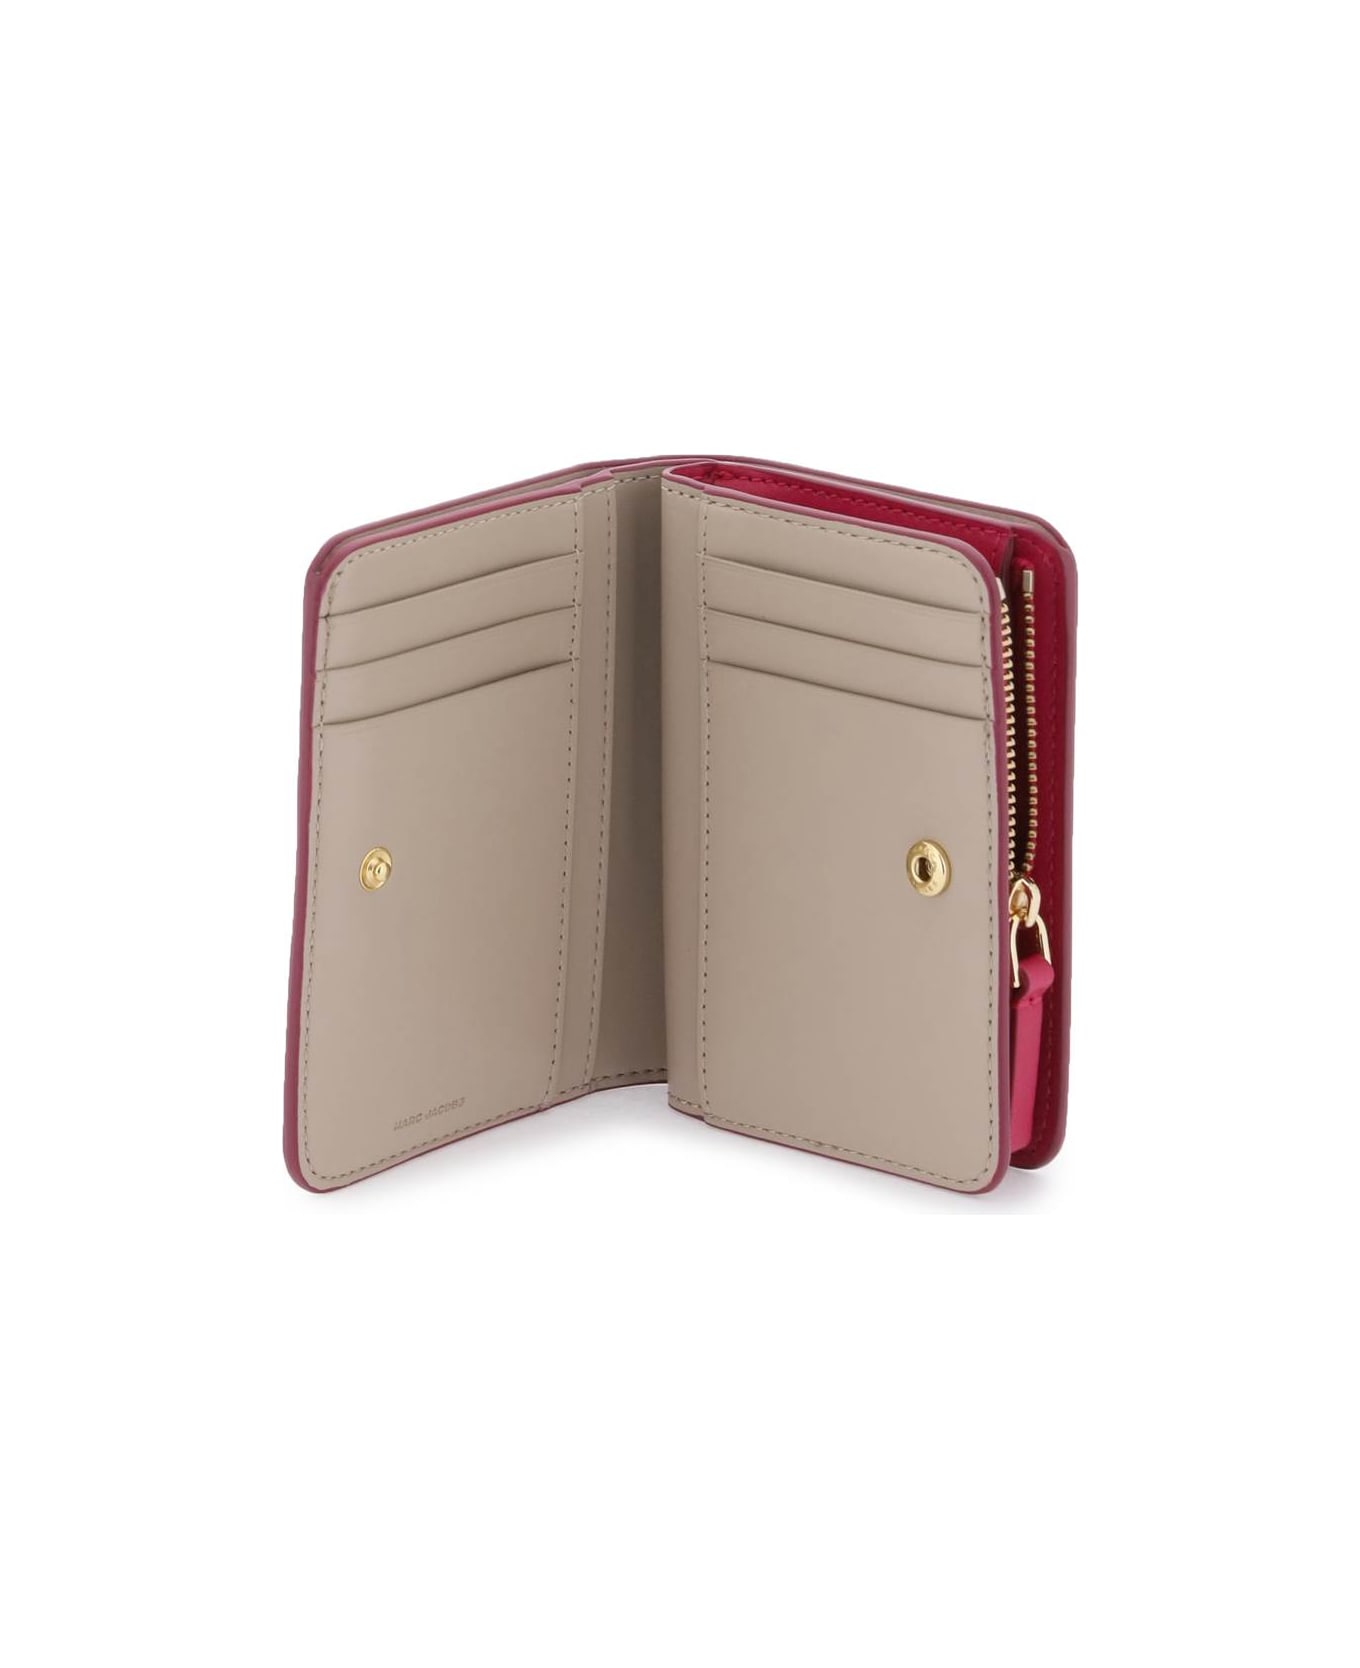 Marc Jacobs The J Marc Mini Compact Wallet - Lipstick pink